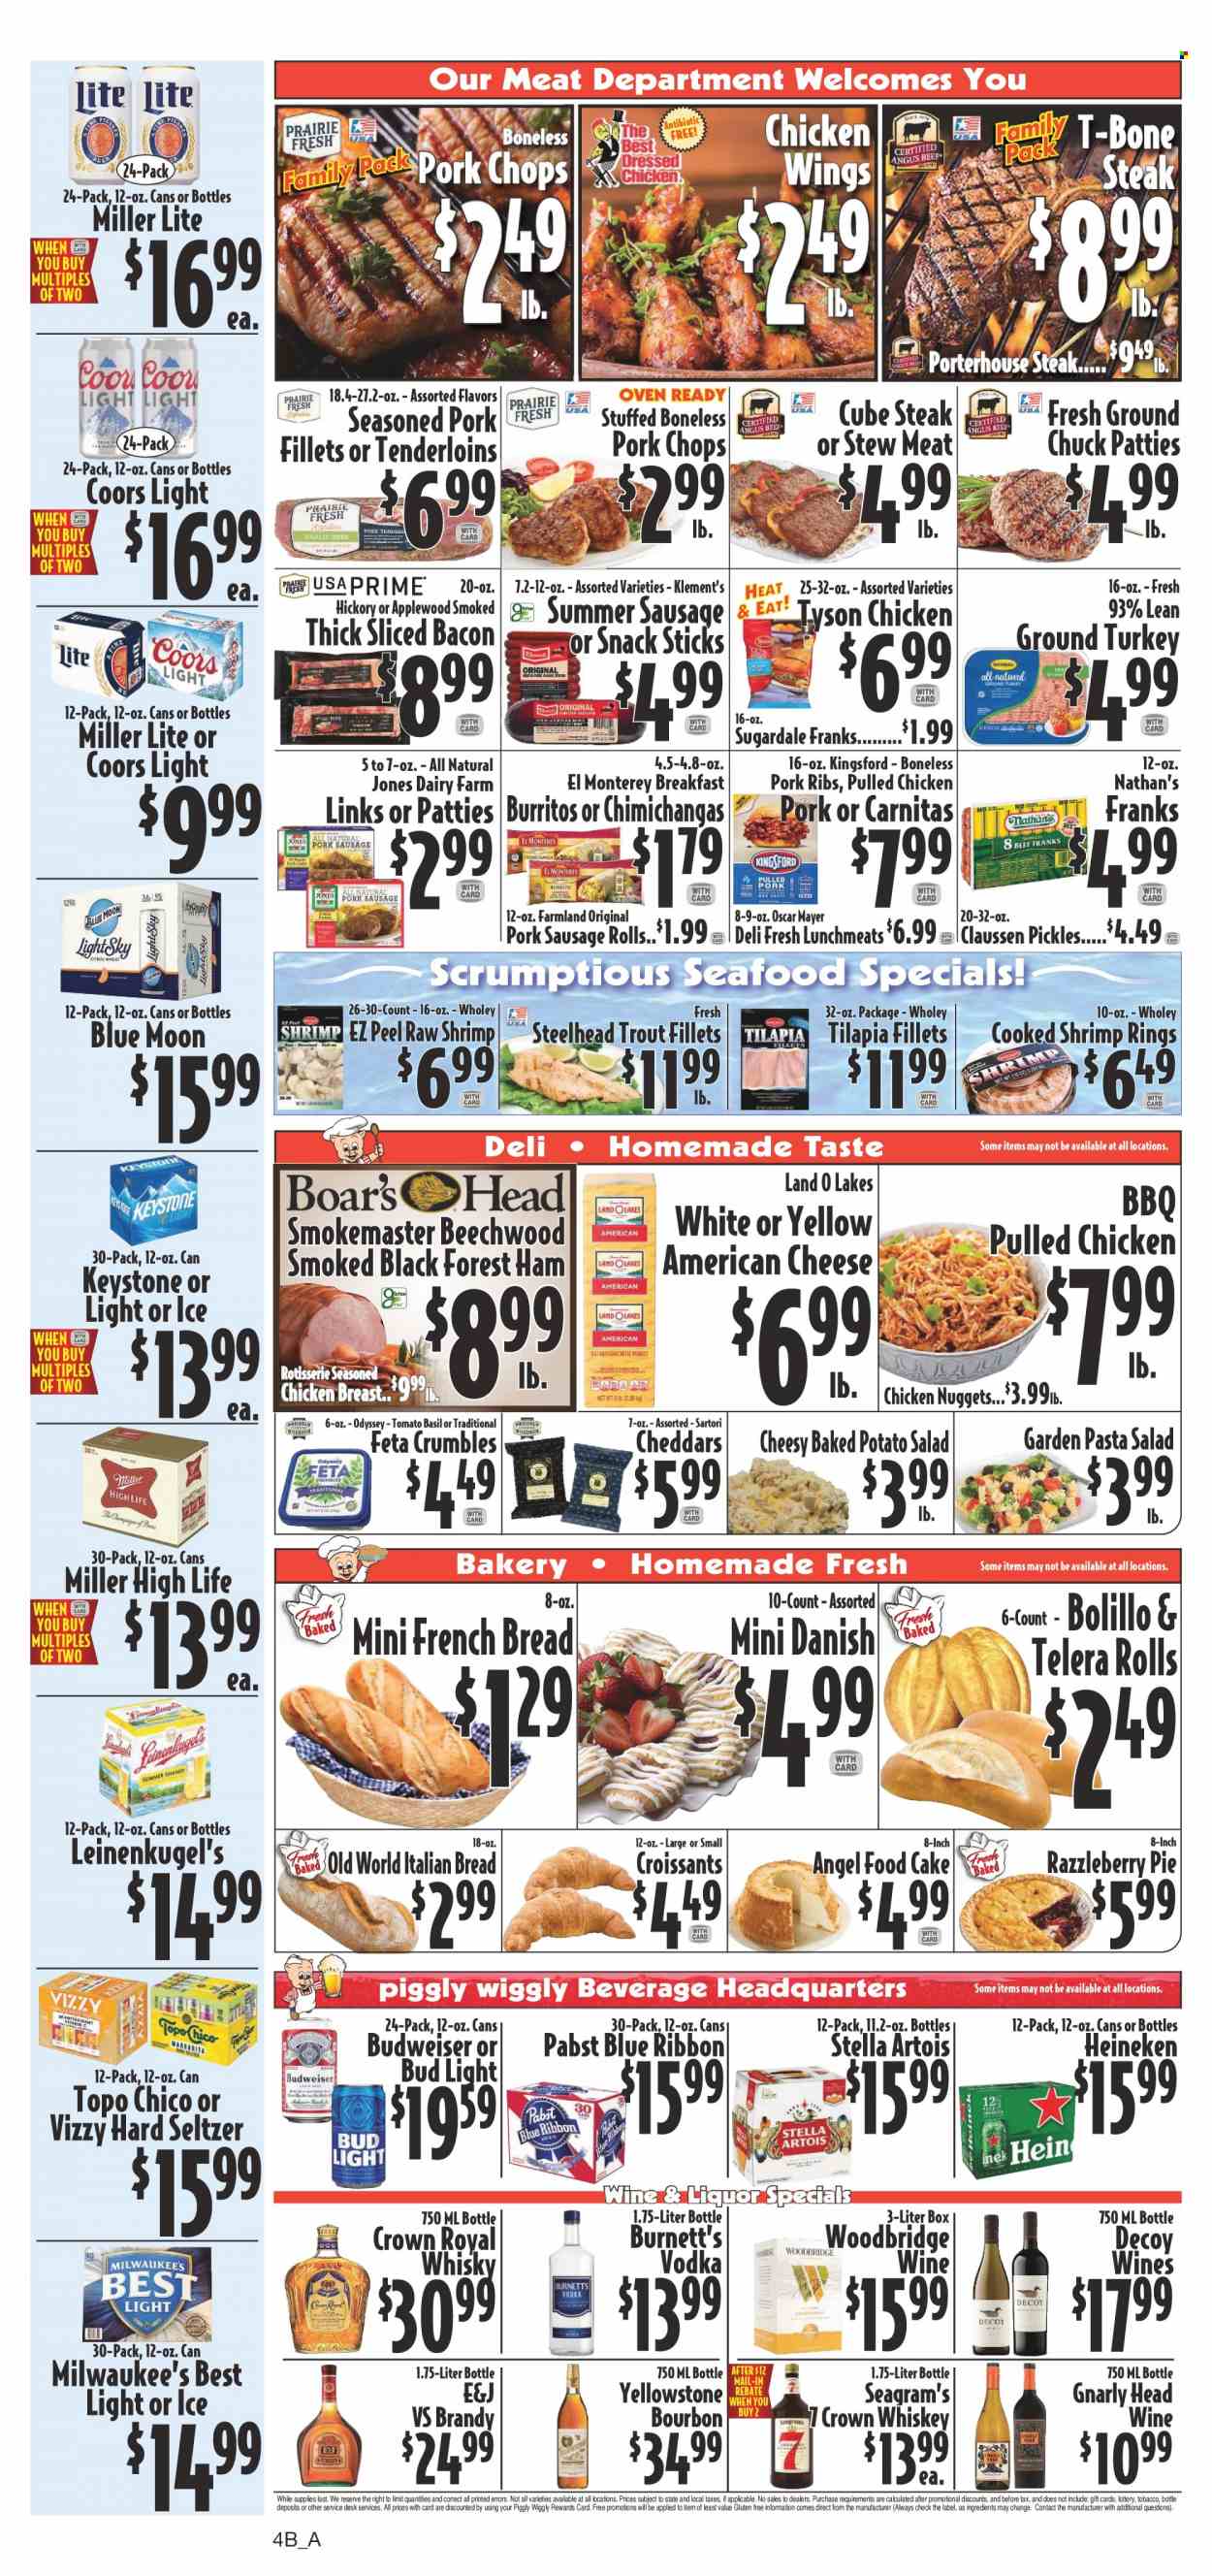 thumbnail - Piggly Wiggly Flyer - 02/01/2023 - 02/07/2023 - Sales products - stew meat, sausage rolls, cake, french bread, Angel Food, tilapia, trout, seafood, shrimps, nuggets, pasta, chicken nuggets, burrito, pulled chicken, Kingsford, Sugardale, bacon, ham, Oscar Mayer, sausage, summer sausage, pork sausage, potato salad, pasta salad, lunch meat, american cheese, cheese, feta, chicken wings, pickles, wine, Woodbridge, bourbon, brandy, vodka, whiskey, liquor, Hard Seltzer, whisky, beer, Stella Artois, Bud Light, Heineken, Keystone, Pabst Blue Ribbon, ground turkey, chicken breasts, beef meat, ground chuck, t-bone steak, steak, ribs, pork chops, pork meat, pork ribs, Budweiser, Leinenkugel's, Miller Lite, Coors, Blue Moon. Page 4.